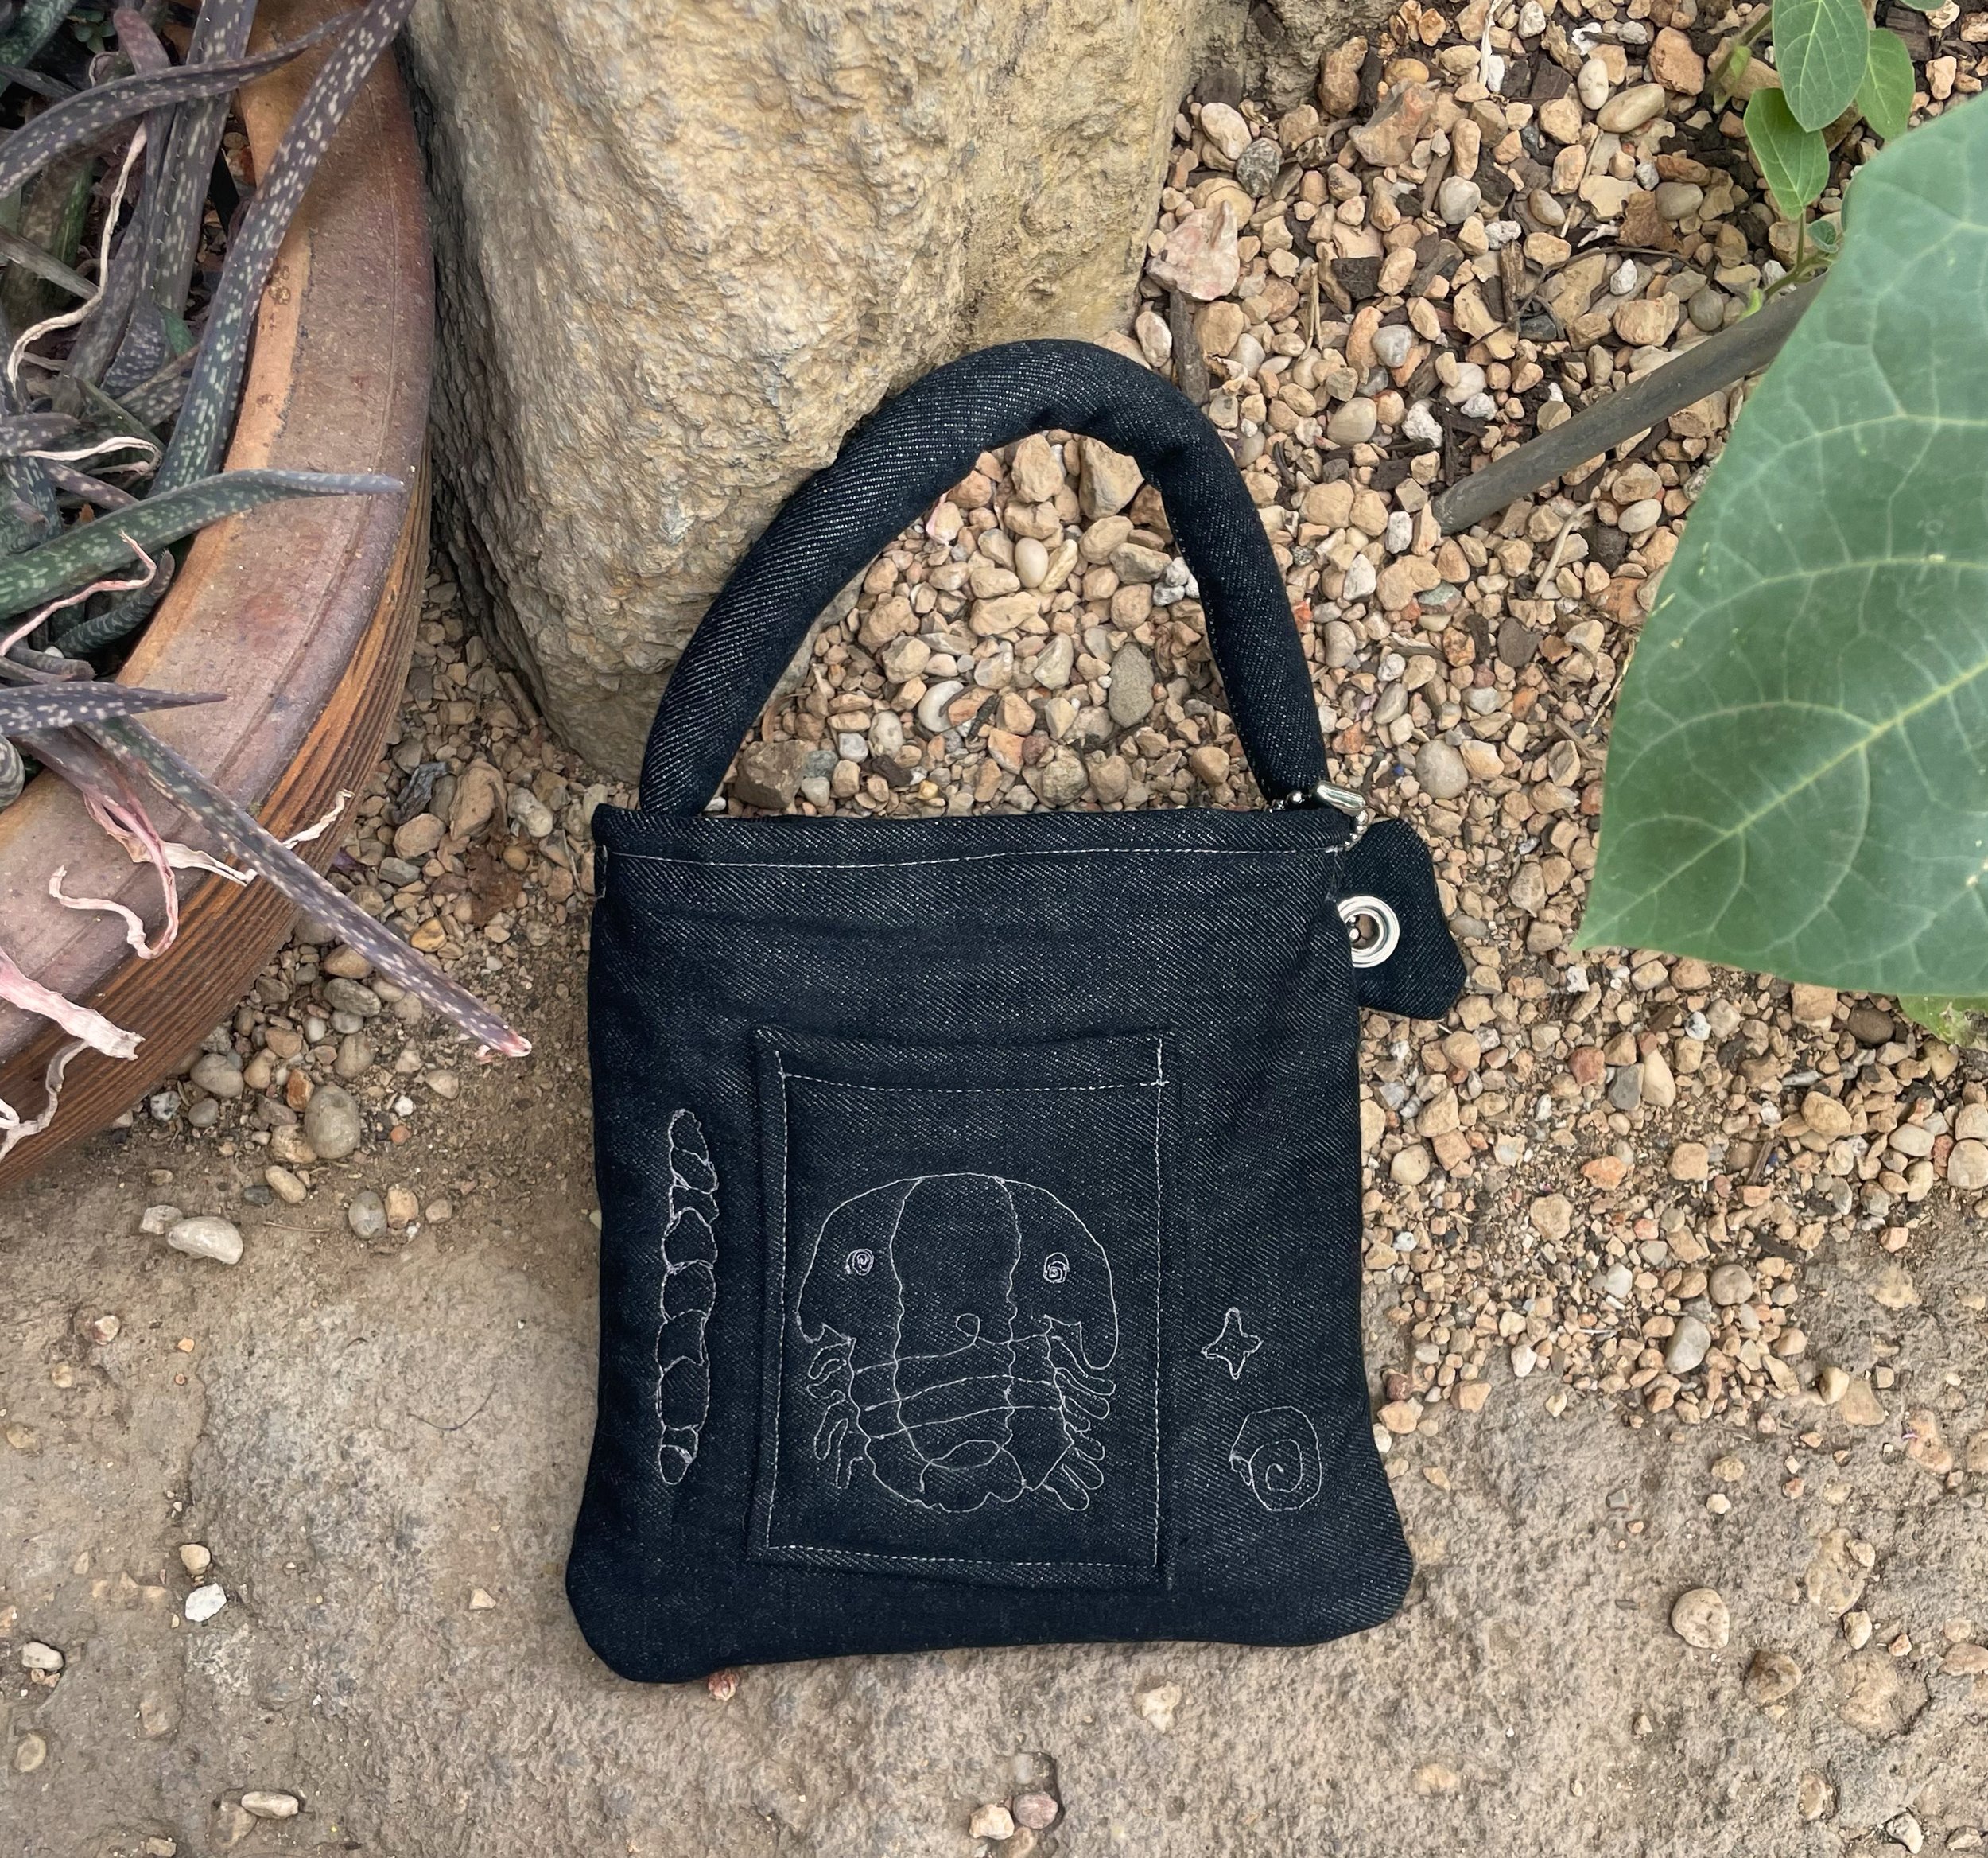  quilted fossil bag 